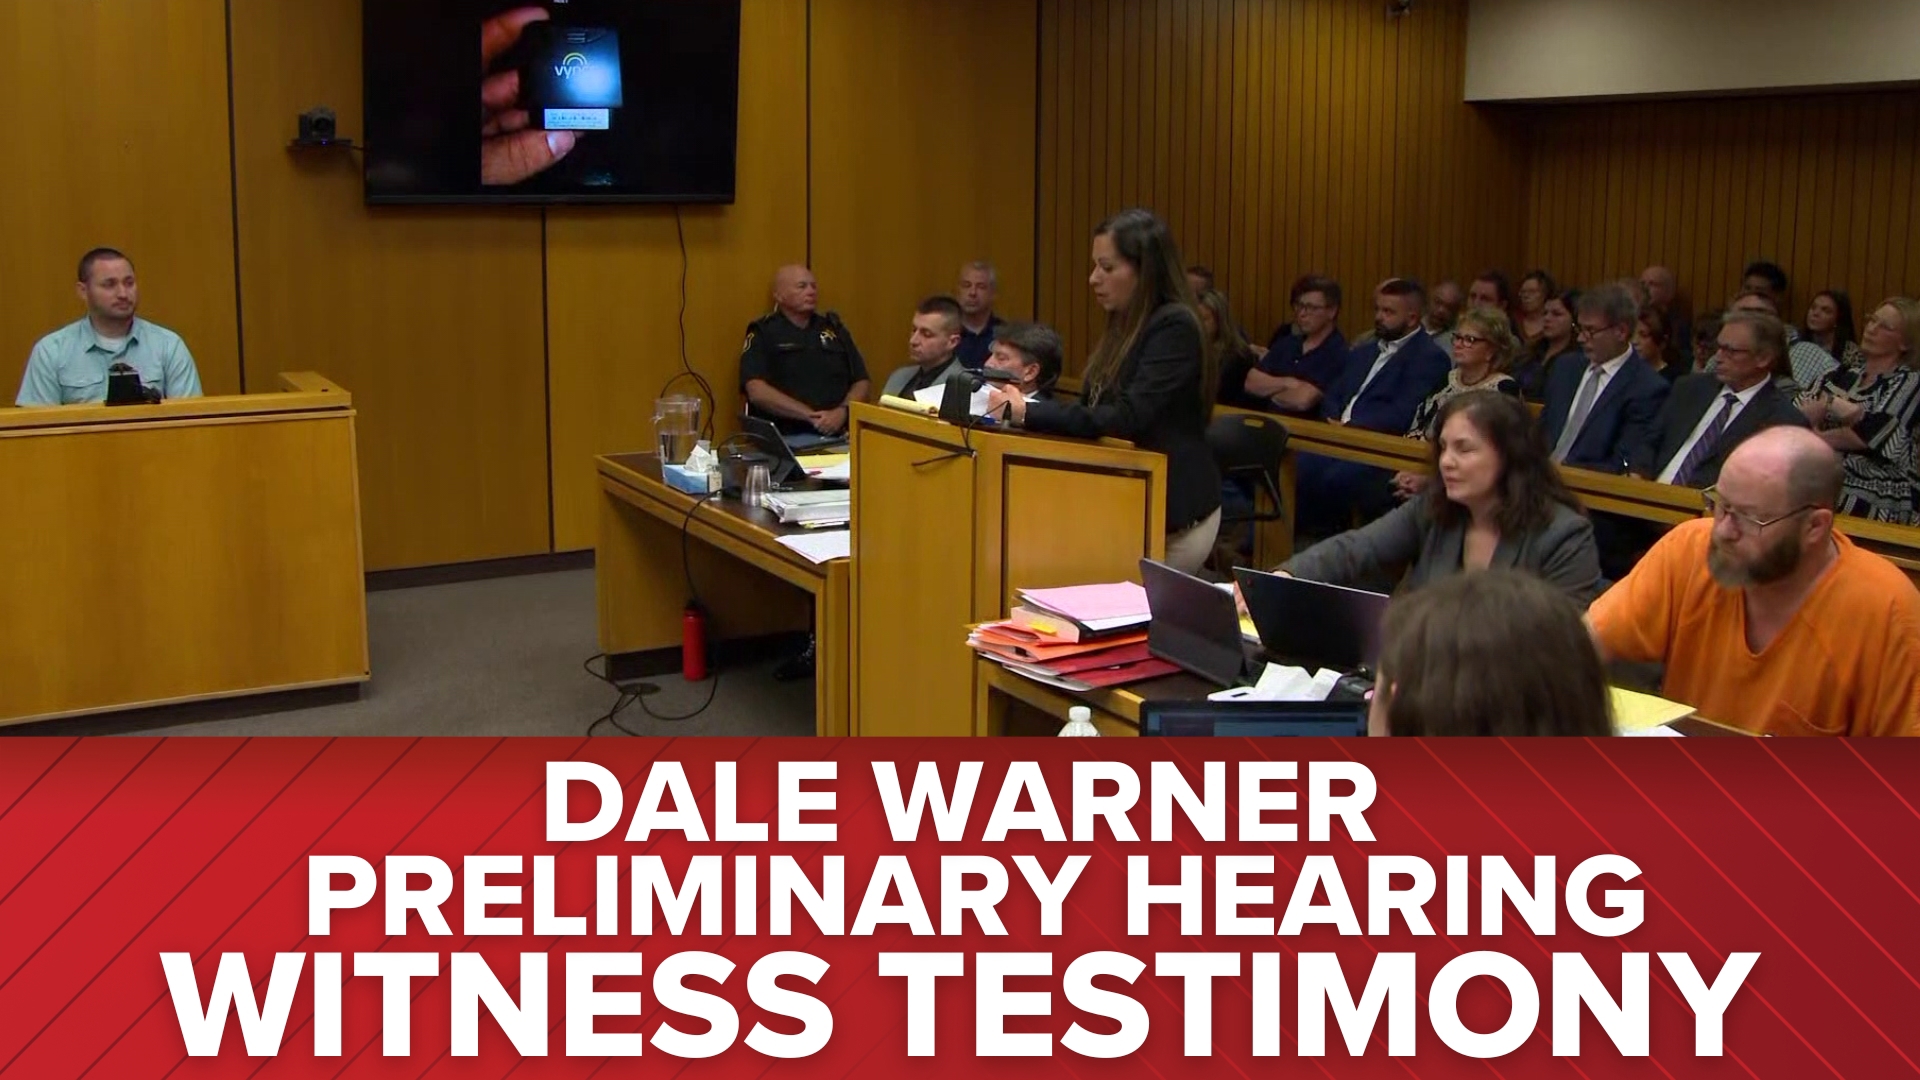 Bush, the first witness to testify, performed odd jobs on the Warner farm and said his relationship with Dee depended on the day and said he was close with Dale.